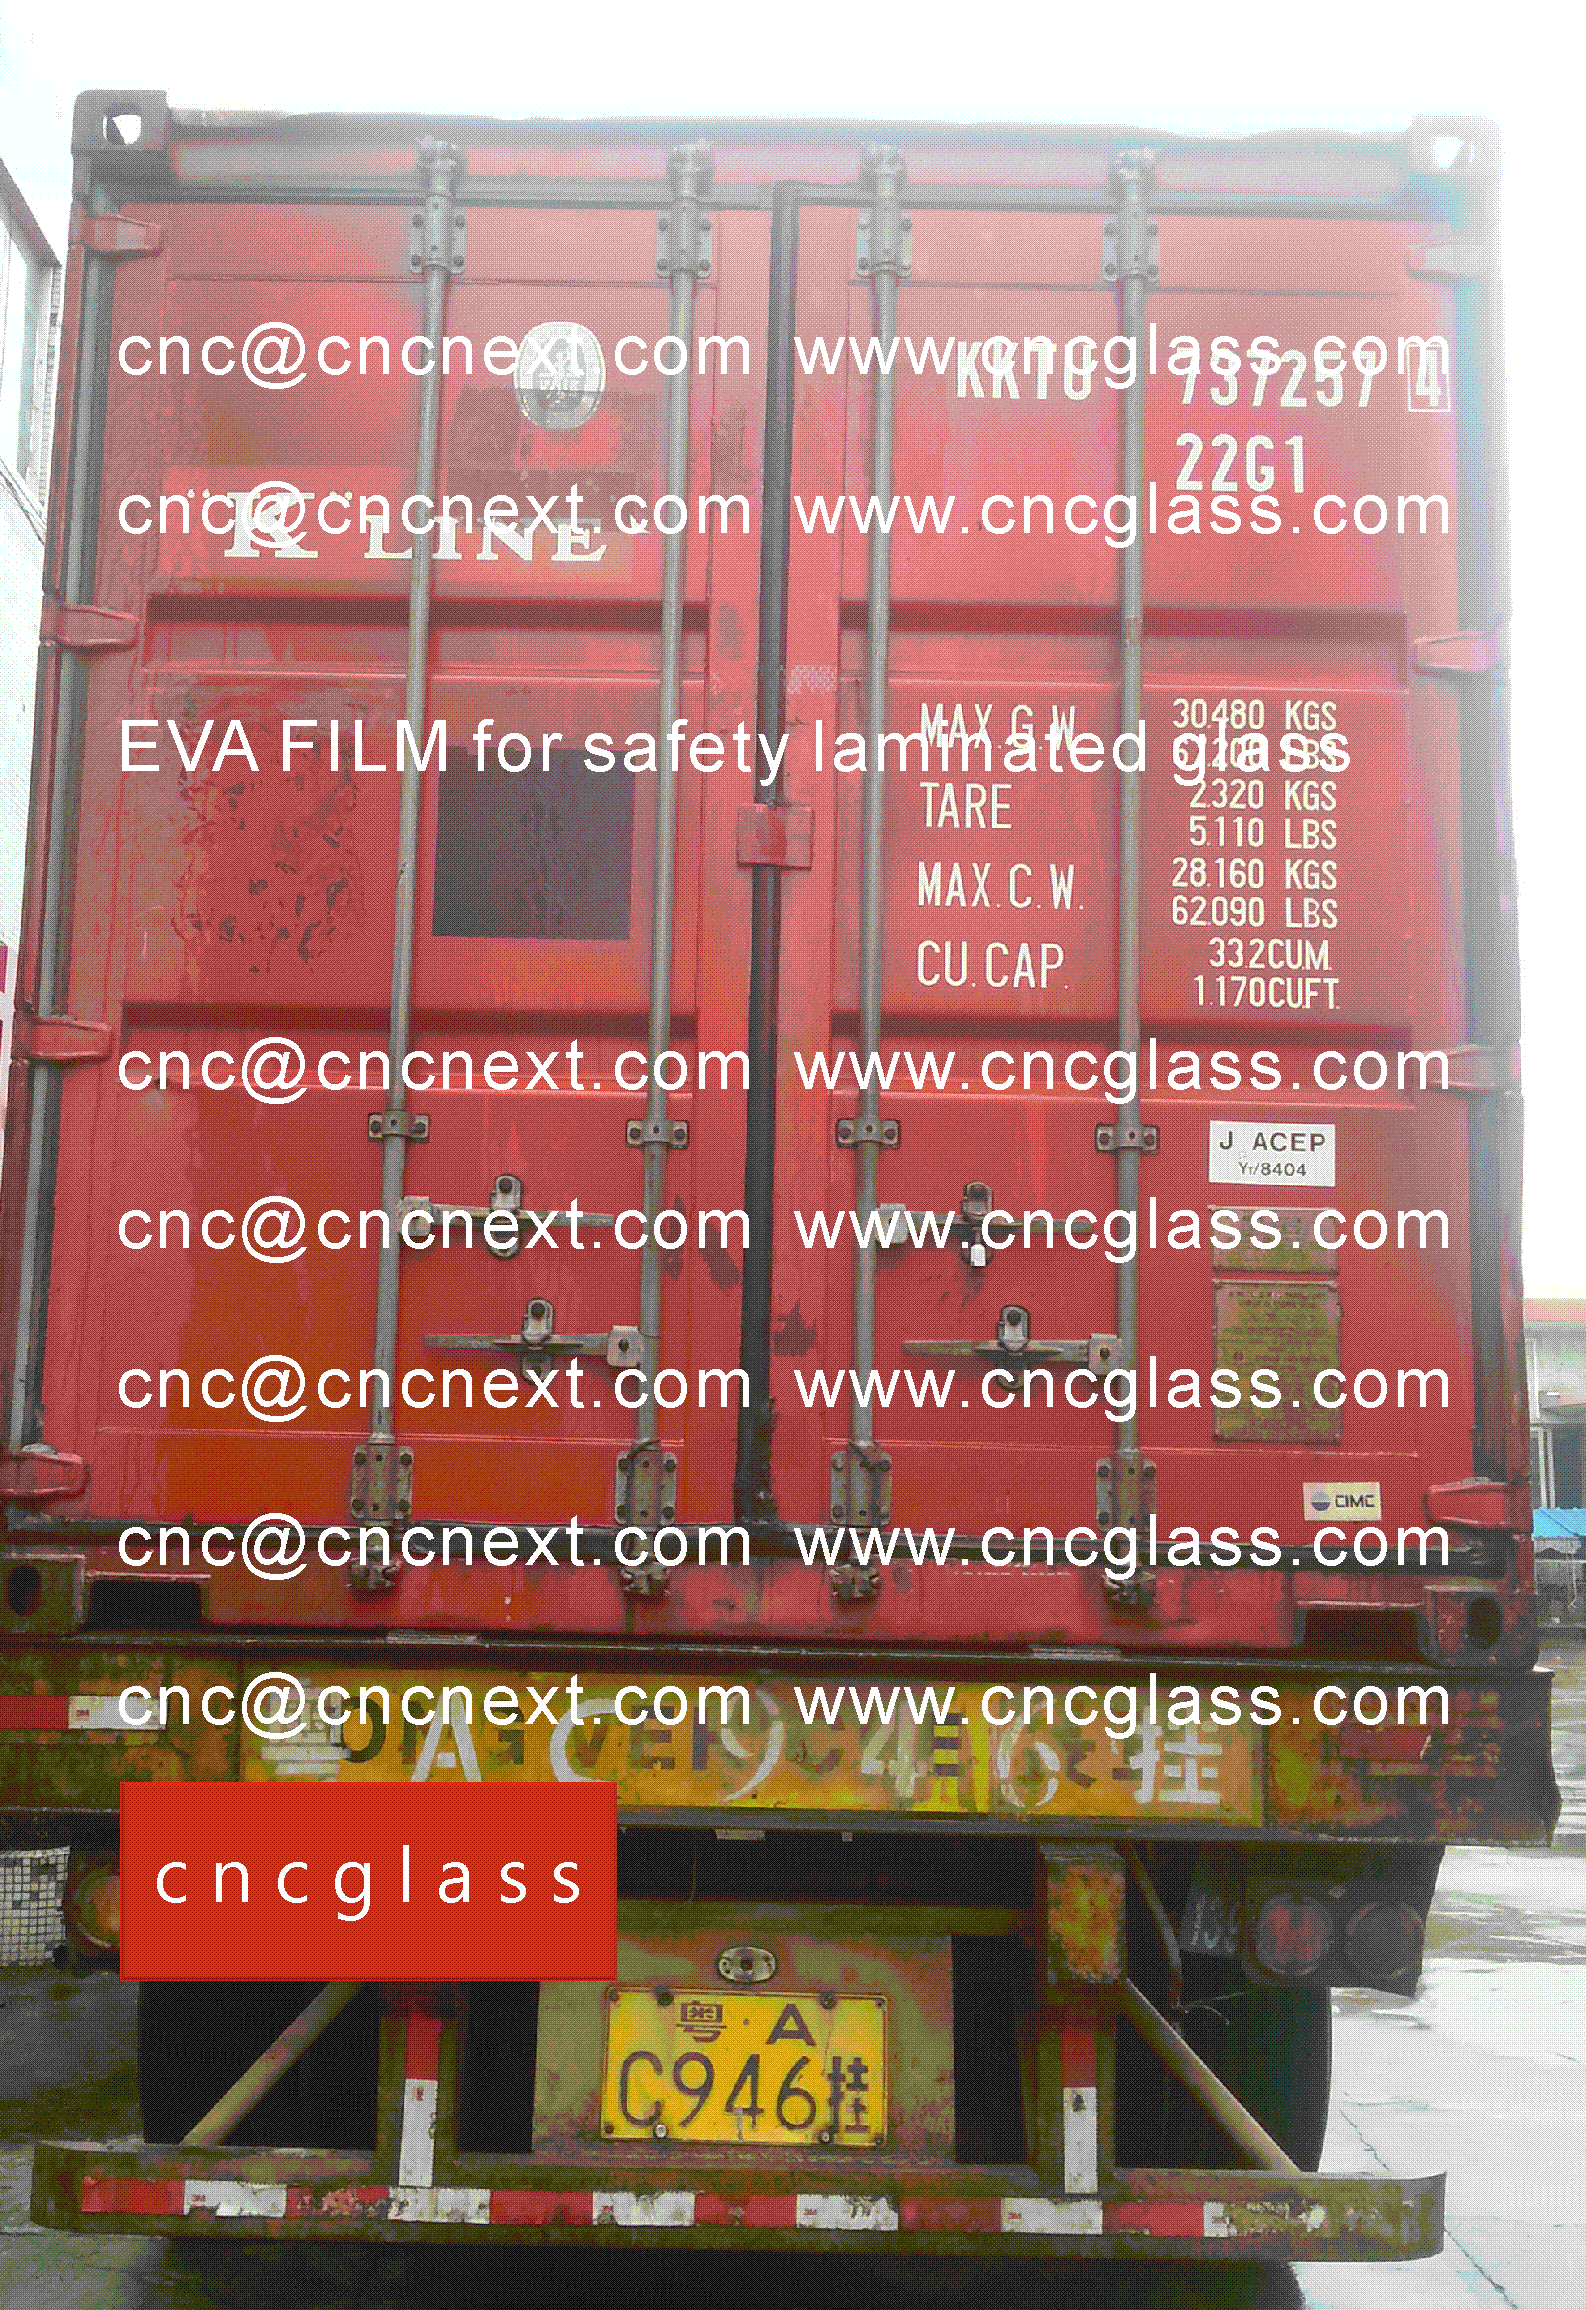 03 EVALAM INATING FILM LOADING CONTAINER (SAFETY LAMINATED GLASS)